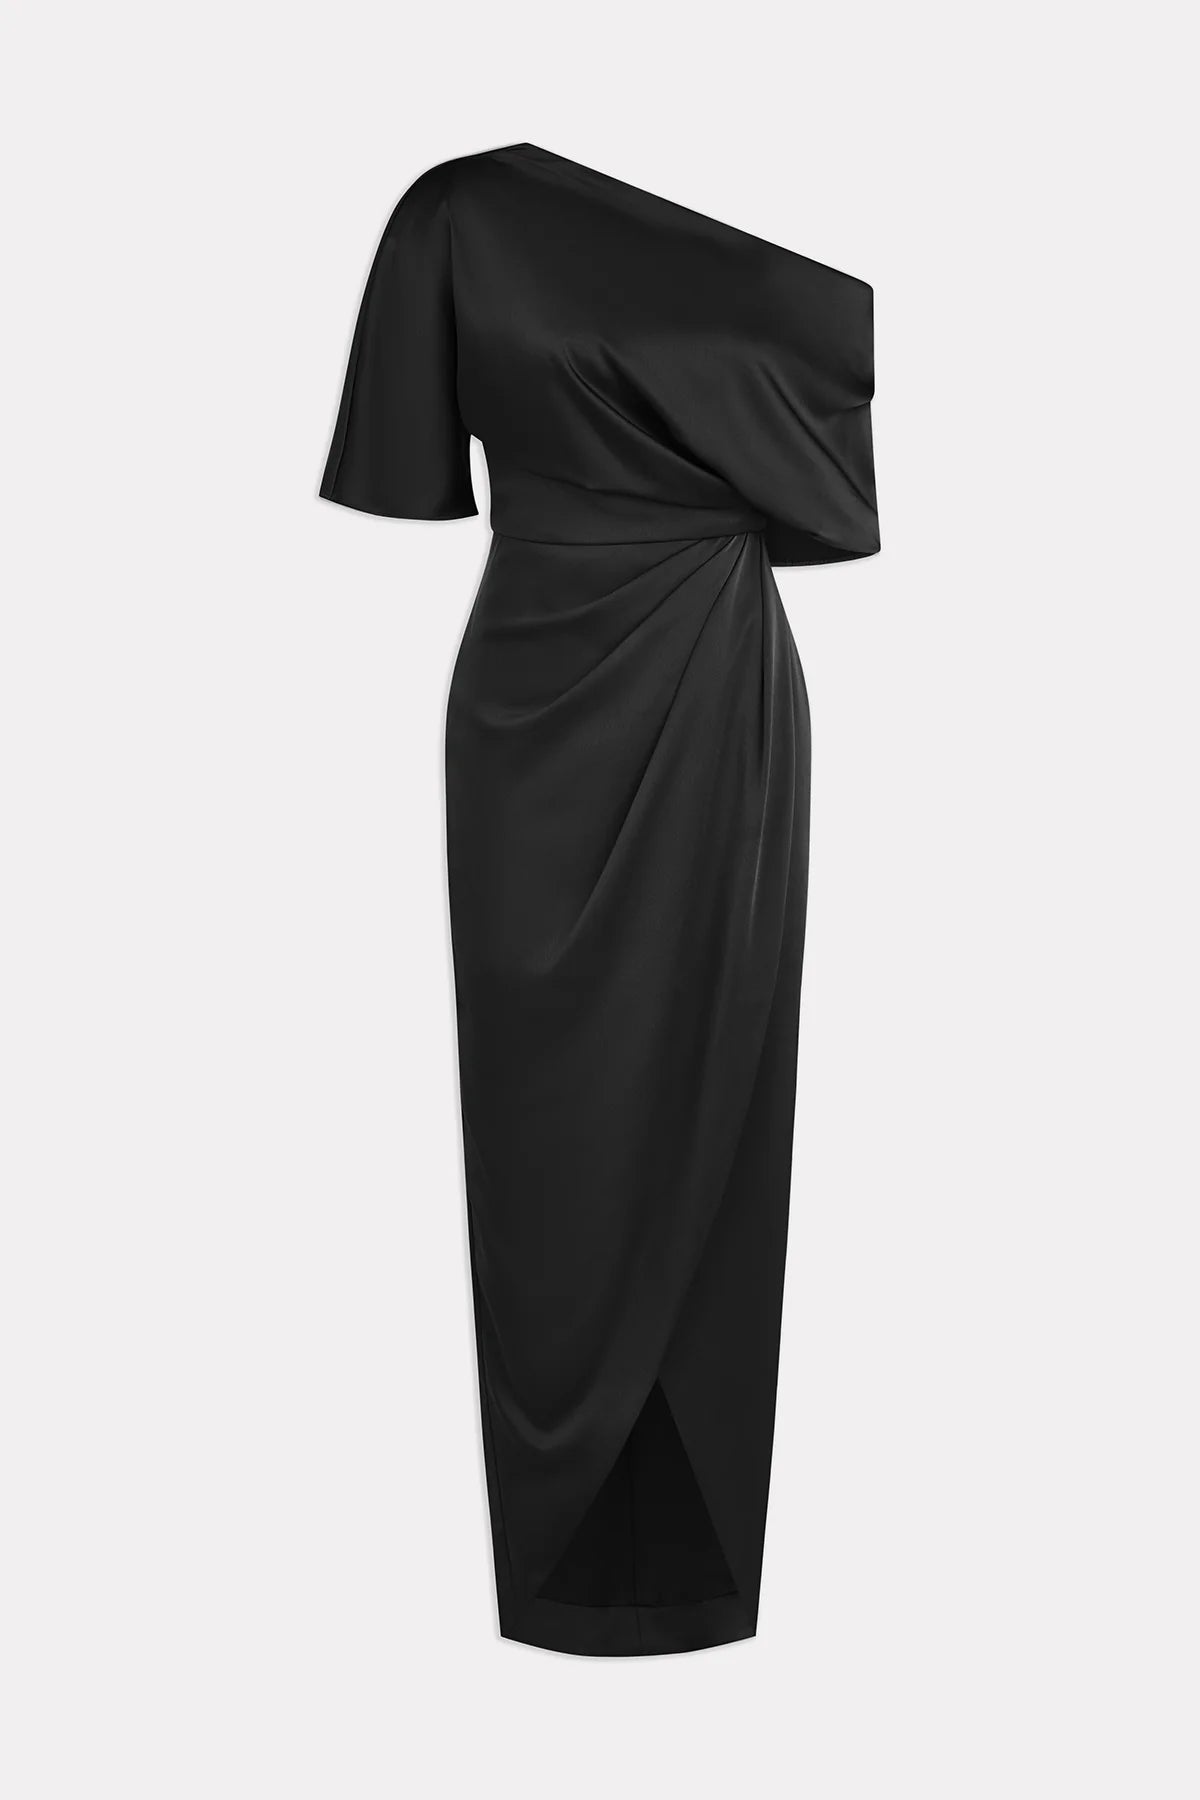 Theia 8818838 Asymmetric Tea-Length Dress in navy blue - Perfect for evening events, mothers of the bride or groom. Model is wearing the dress in Black.